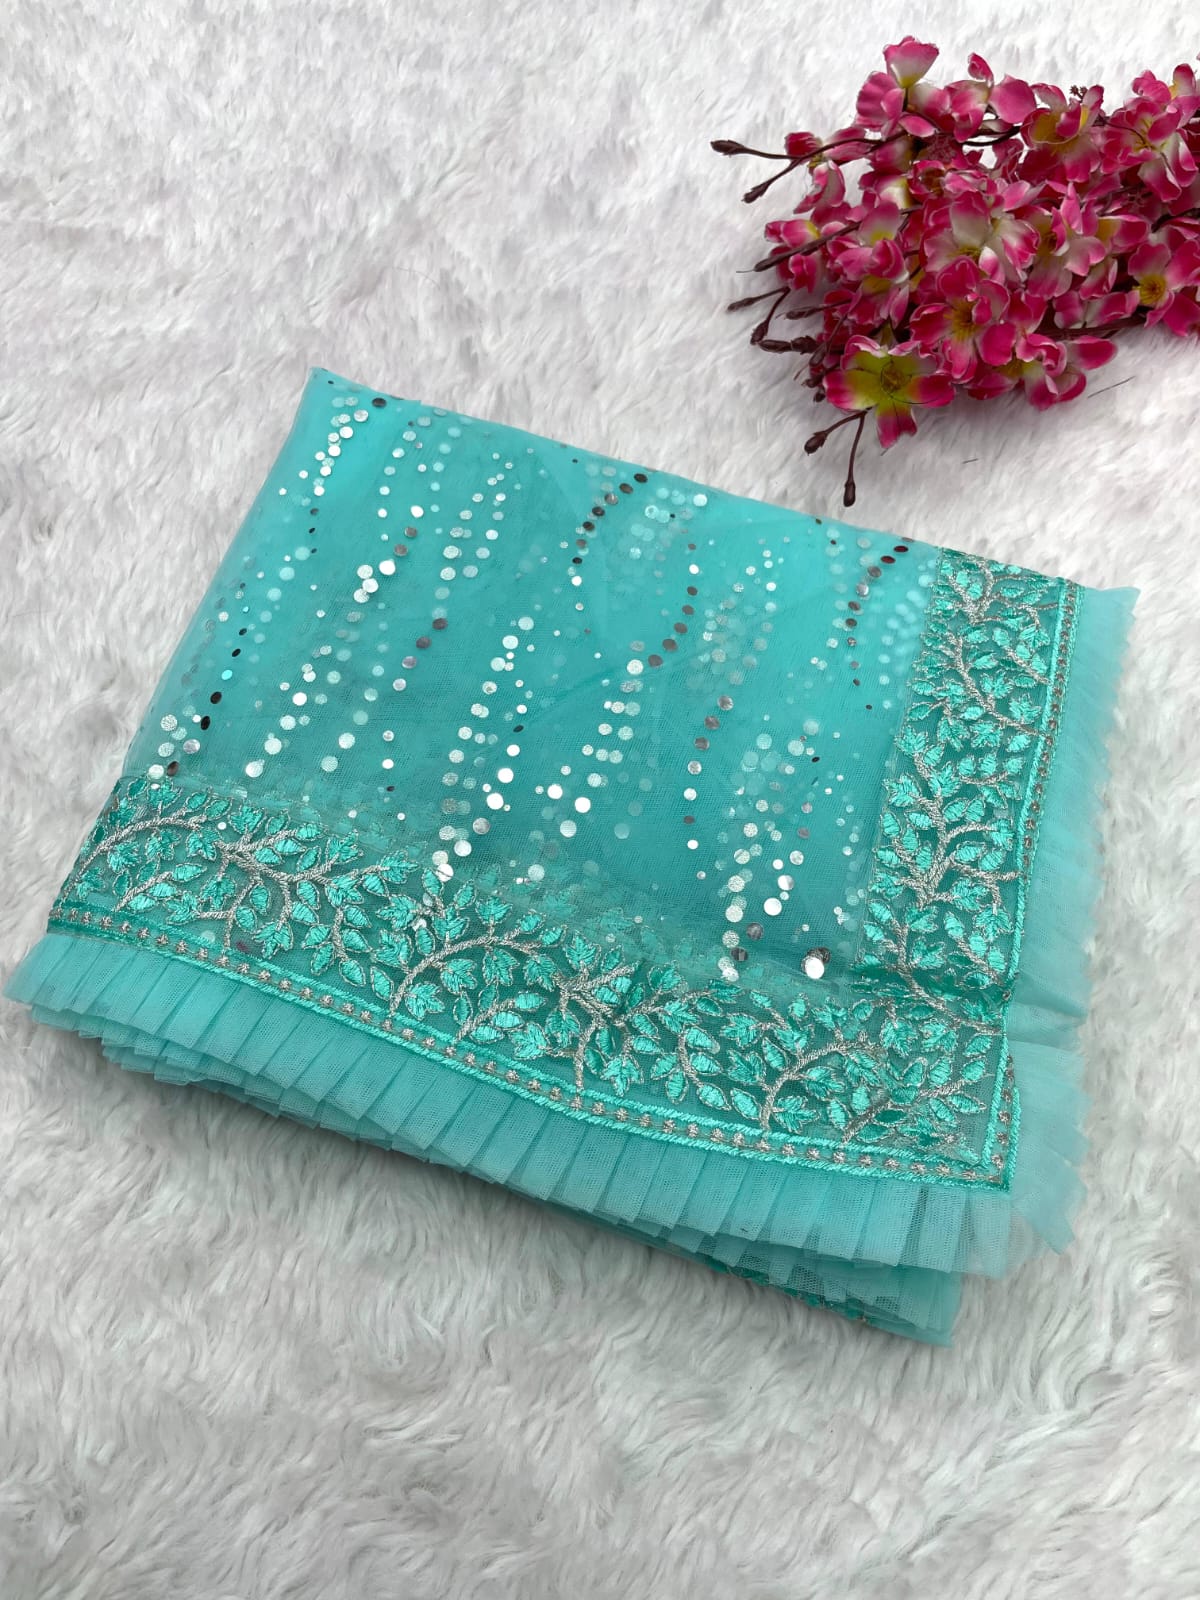 Mono Net Saree with Mirror Foil Work, Thread Embroidery, and Double Frill Border